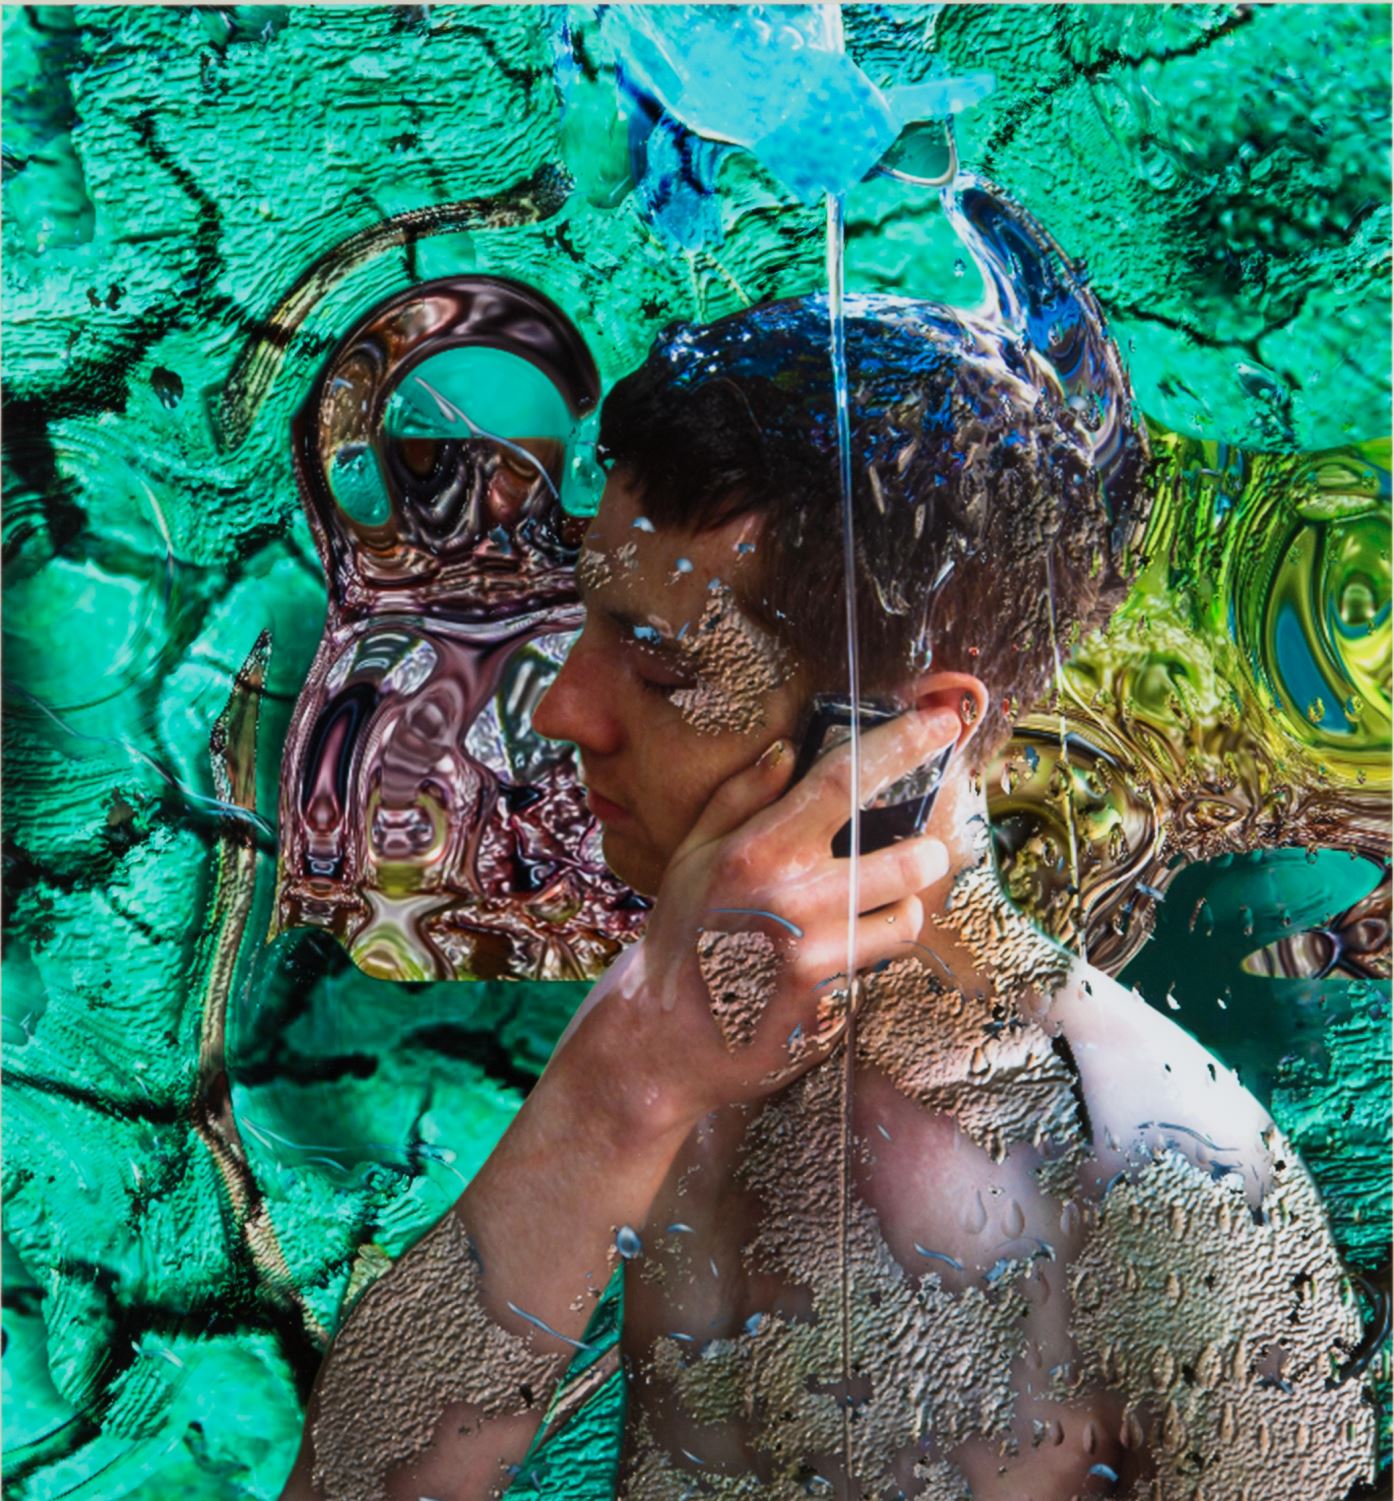 Digital collage by artist Adan Faramawy. The image shows a male head and shoulders using mobile phone, the figures is partially obscured and blended into a background of swirling digital textures. The artwork was included in the exhibition Pre-Pop To Post-Human: Collage In The Digital Age.